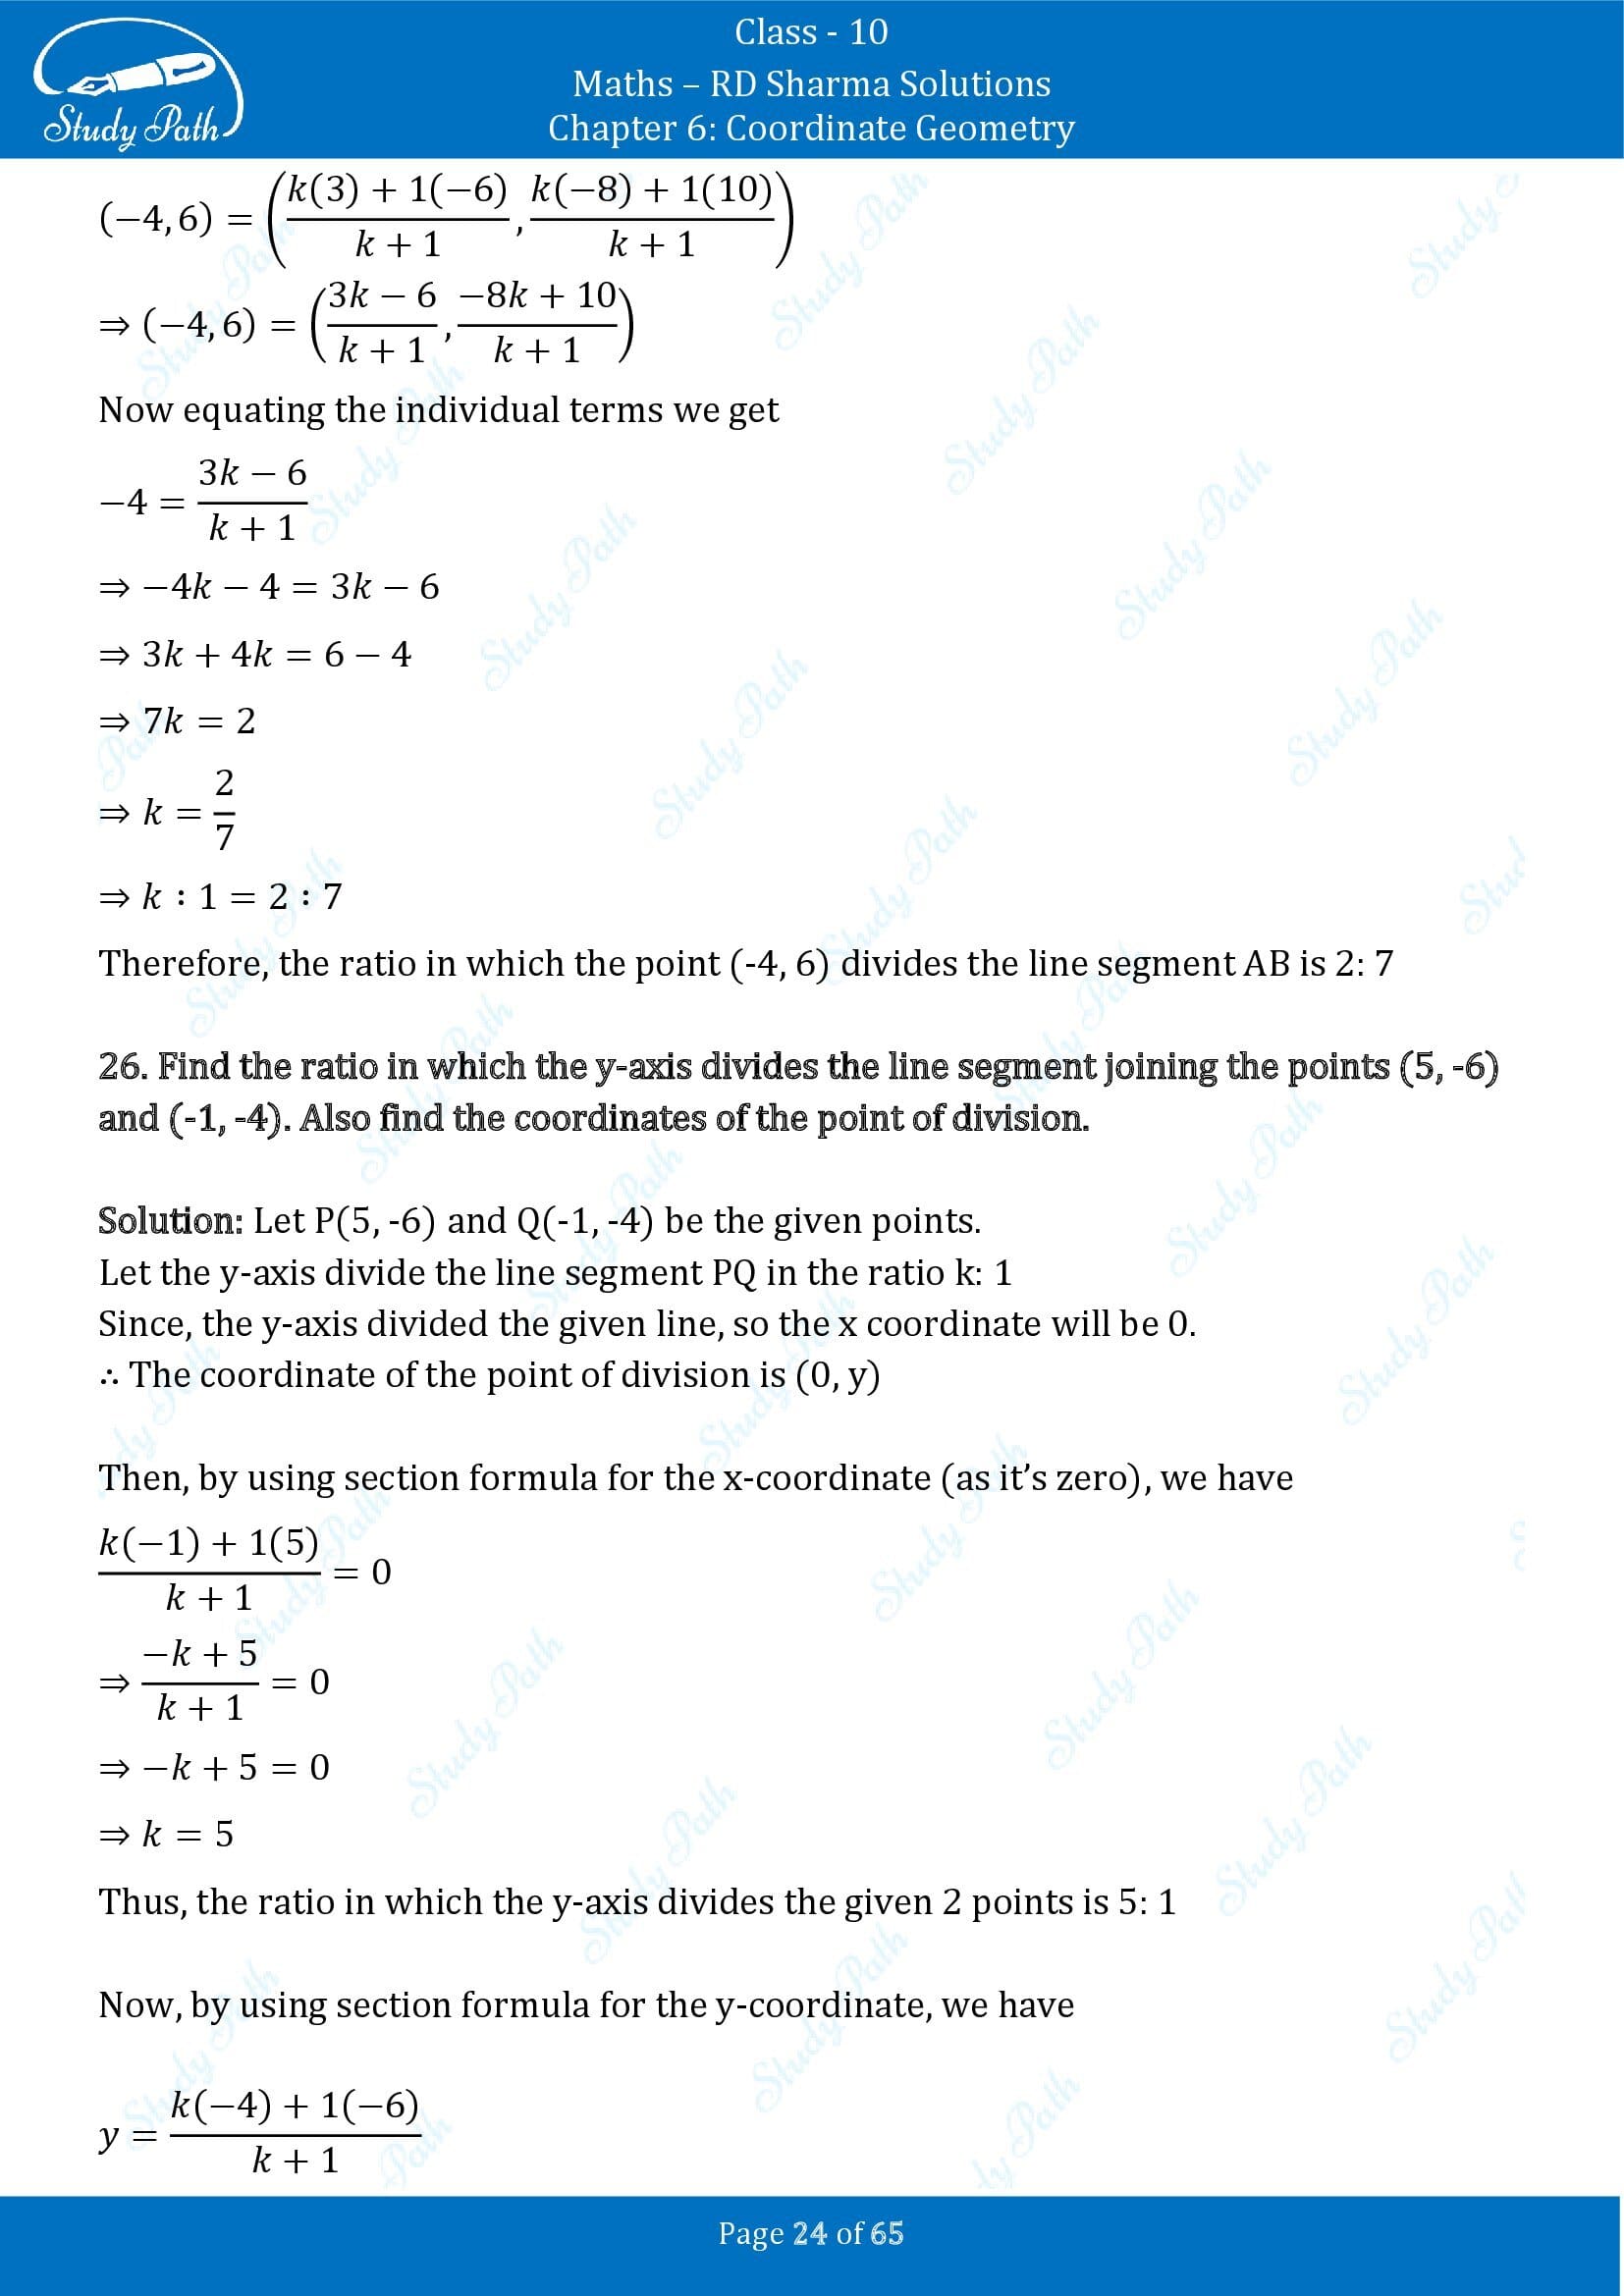 RD Sharma Solutions Class 10 Chapter 6 Coordinate Geometry Exercise 6.3 00024